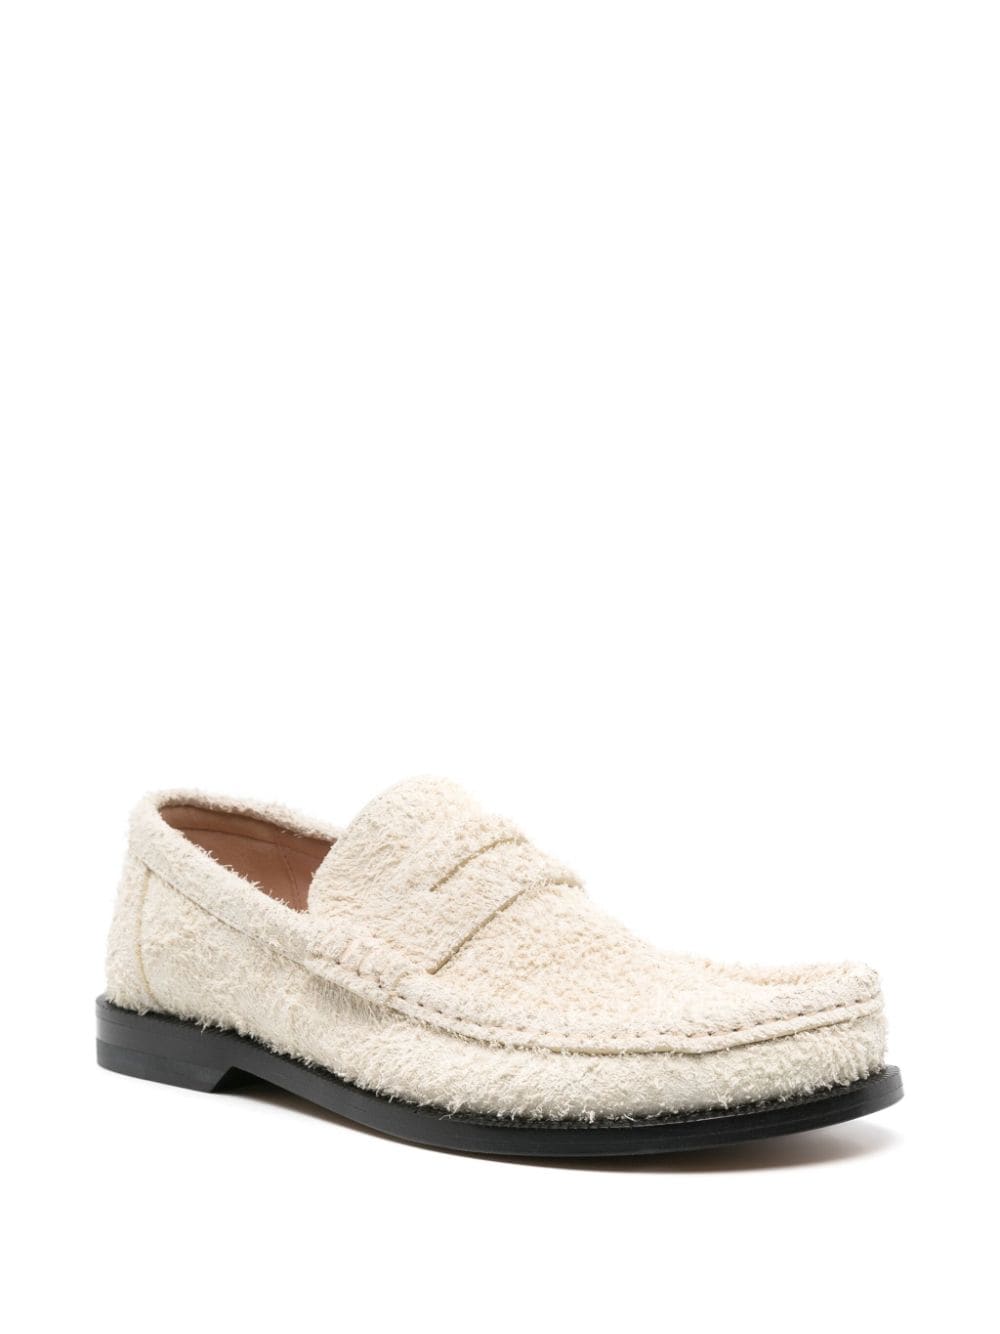 LOEWE Campo brushed suede loafers - Beige